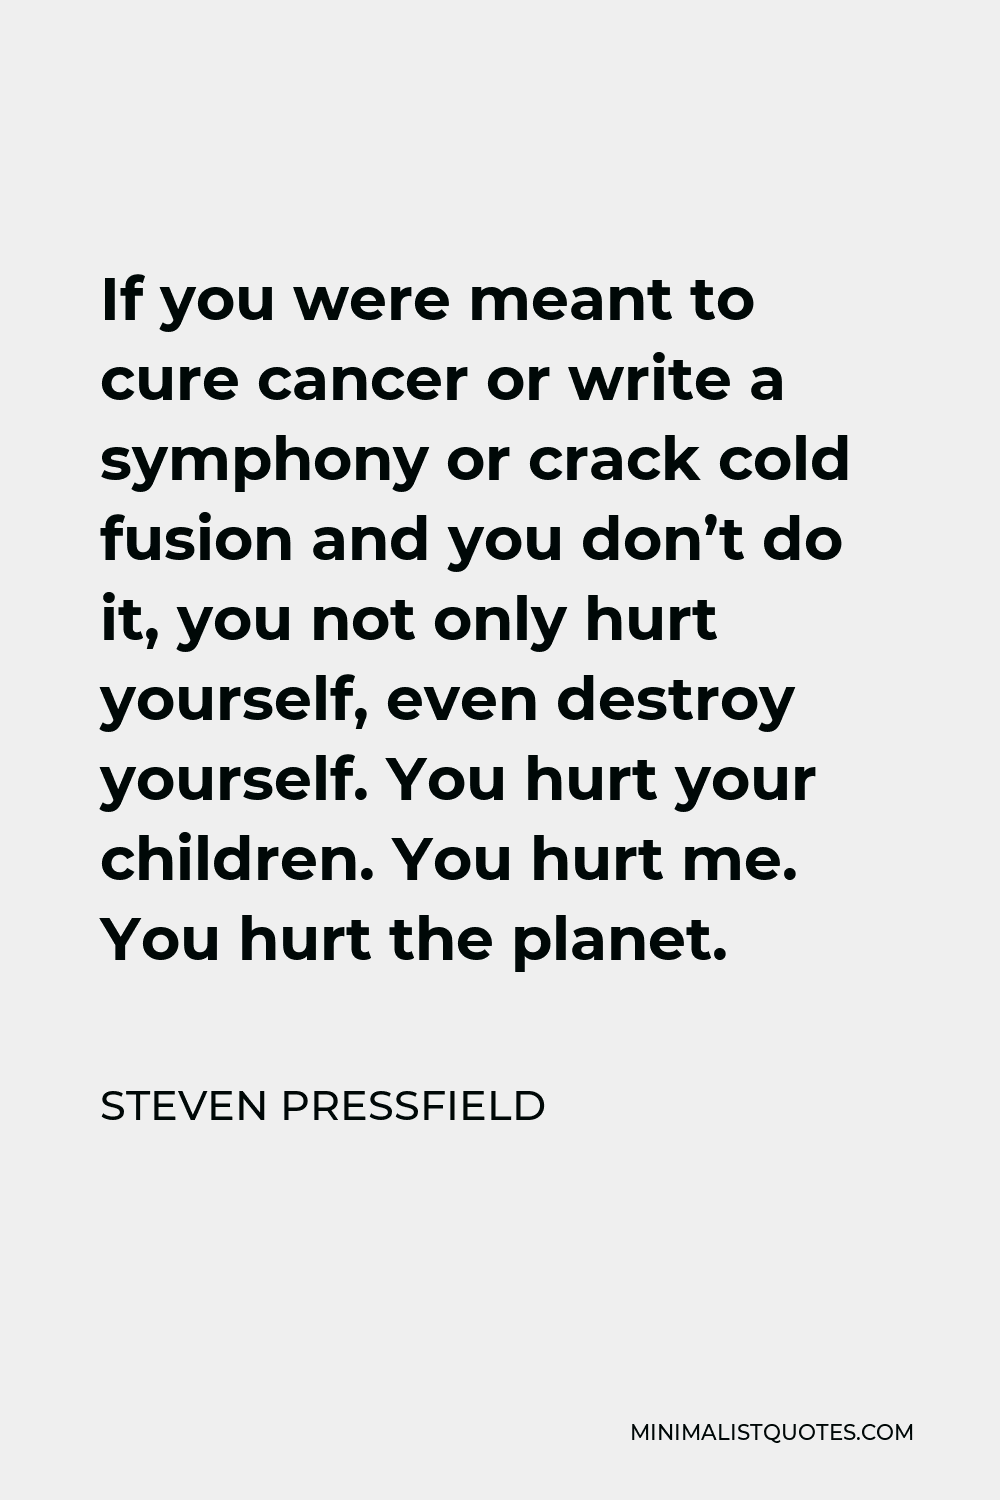 Steven Pressfield Quote - If you were meant to cure cancer or write a symphony or crack cold fusion and you don’t do it, you not only hurt yourself, even destroy yourself. You hurt your children. You hurt me. You hurt the planet.